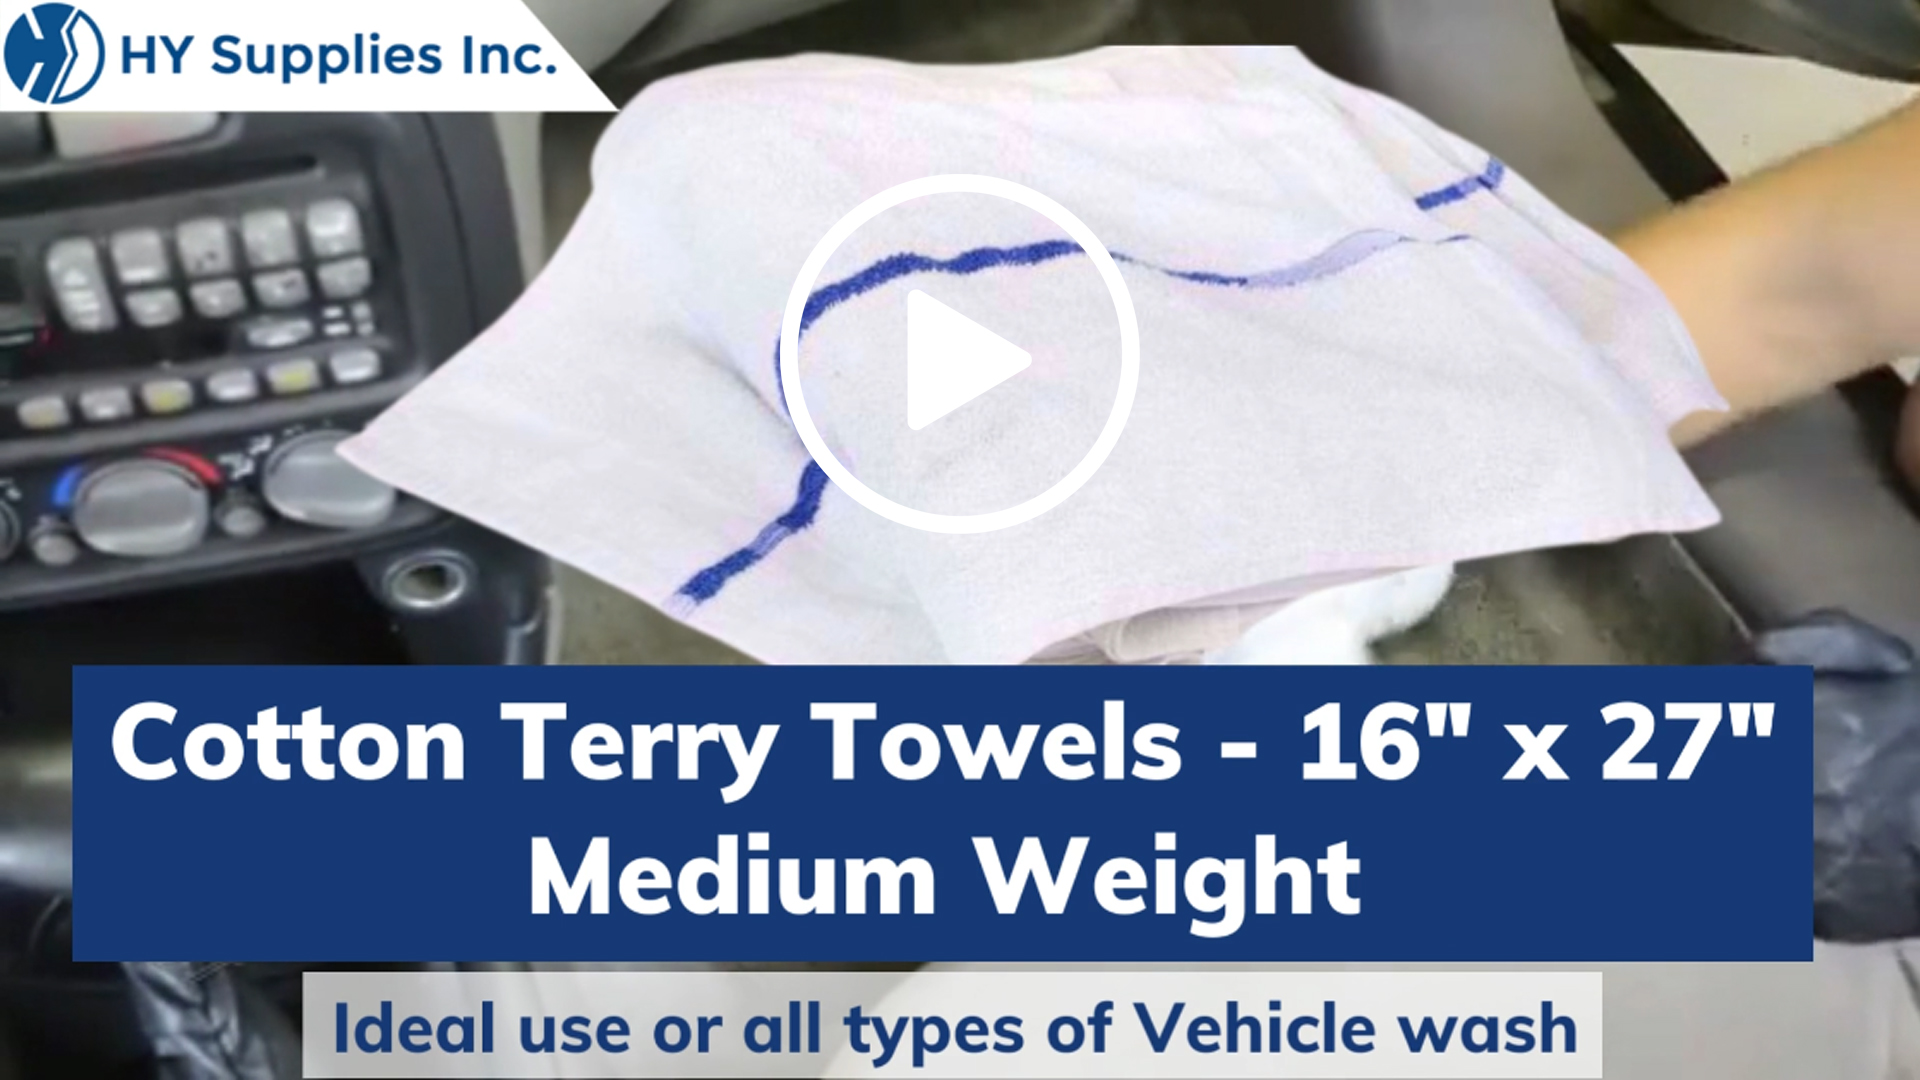 Cotton Terry Towels - 16 x 27 Medium Weight	